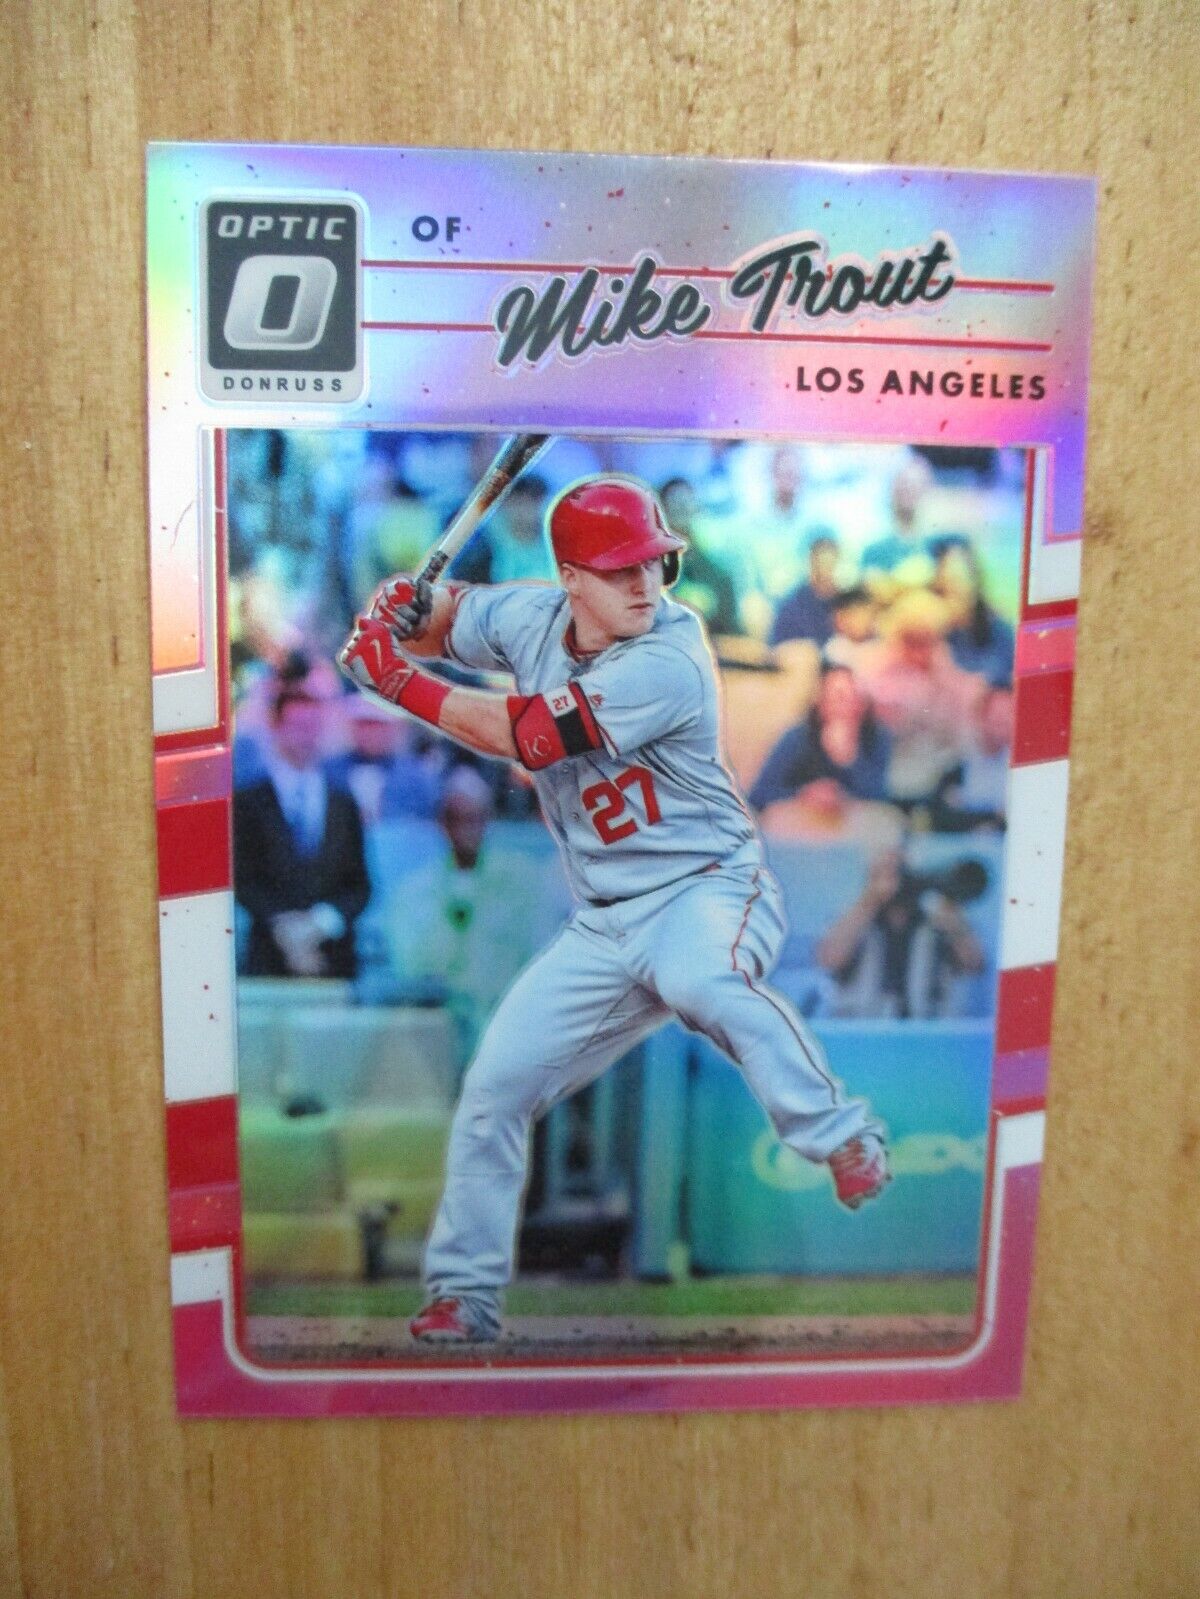 Mike Trout 2017 Donruss Optic Pink Prizm Refractor 107 Los Angeles Panini Card